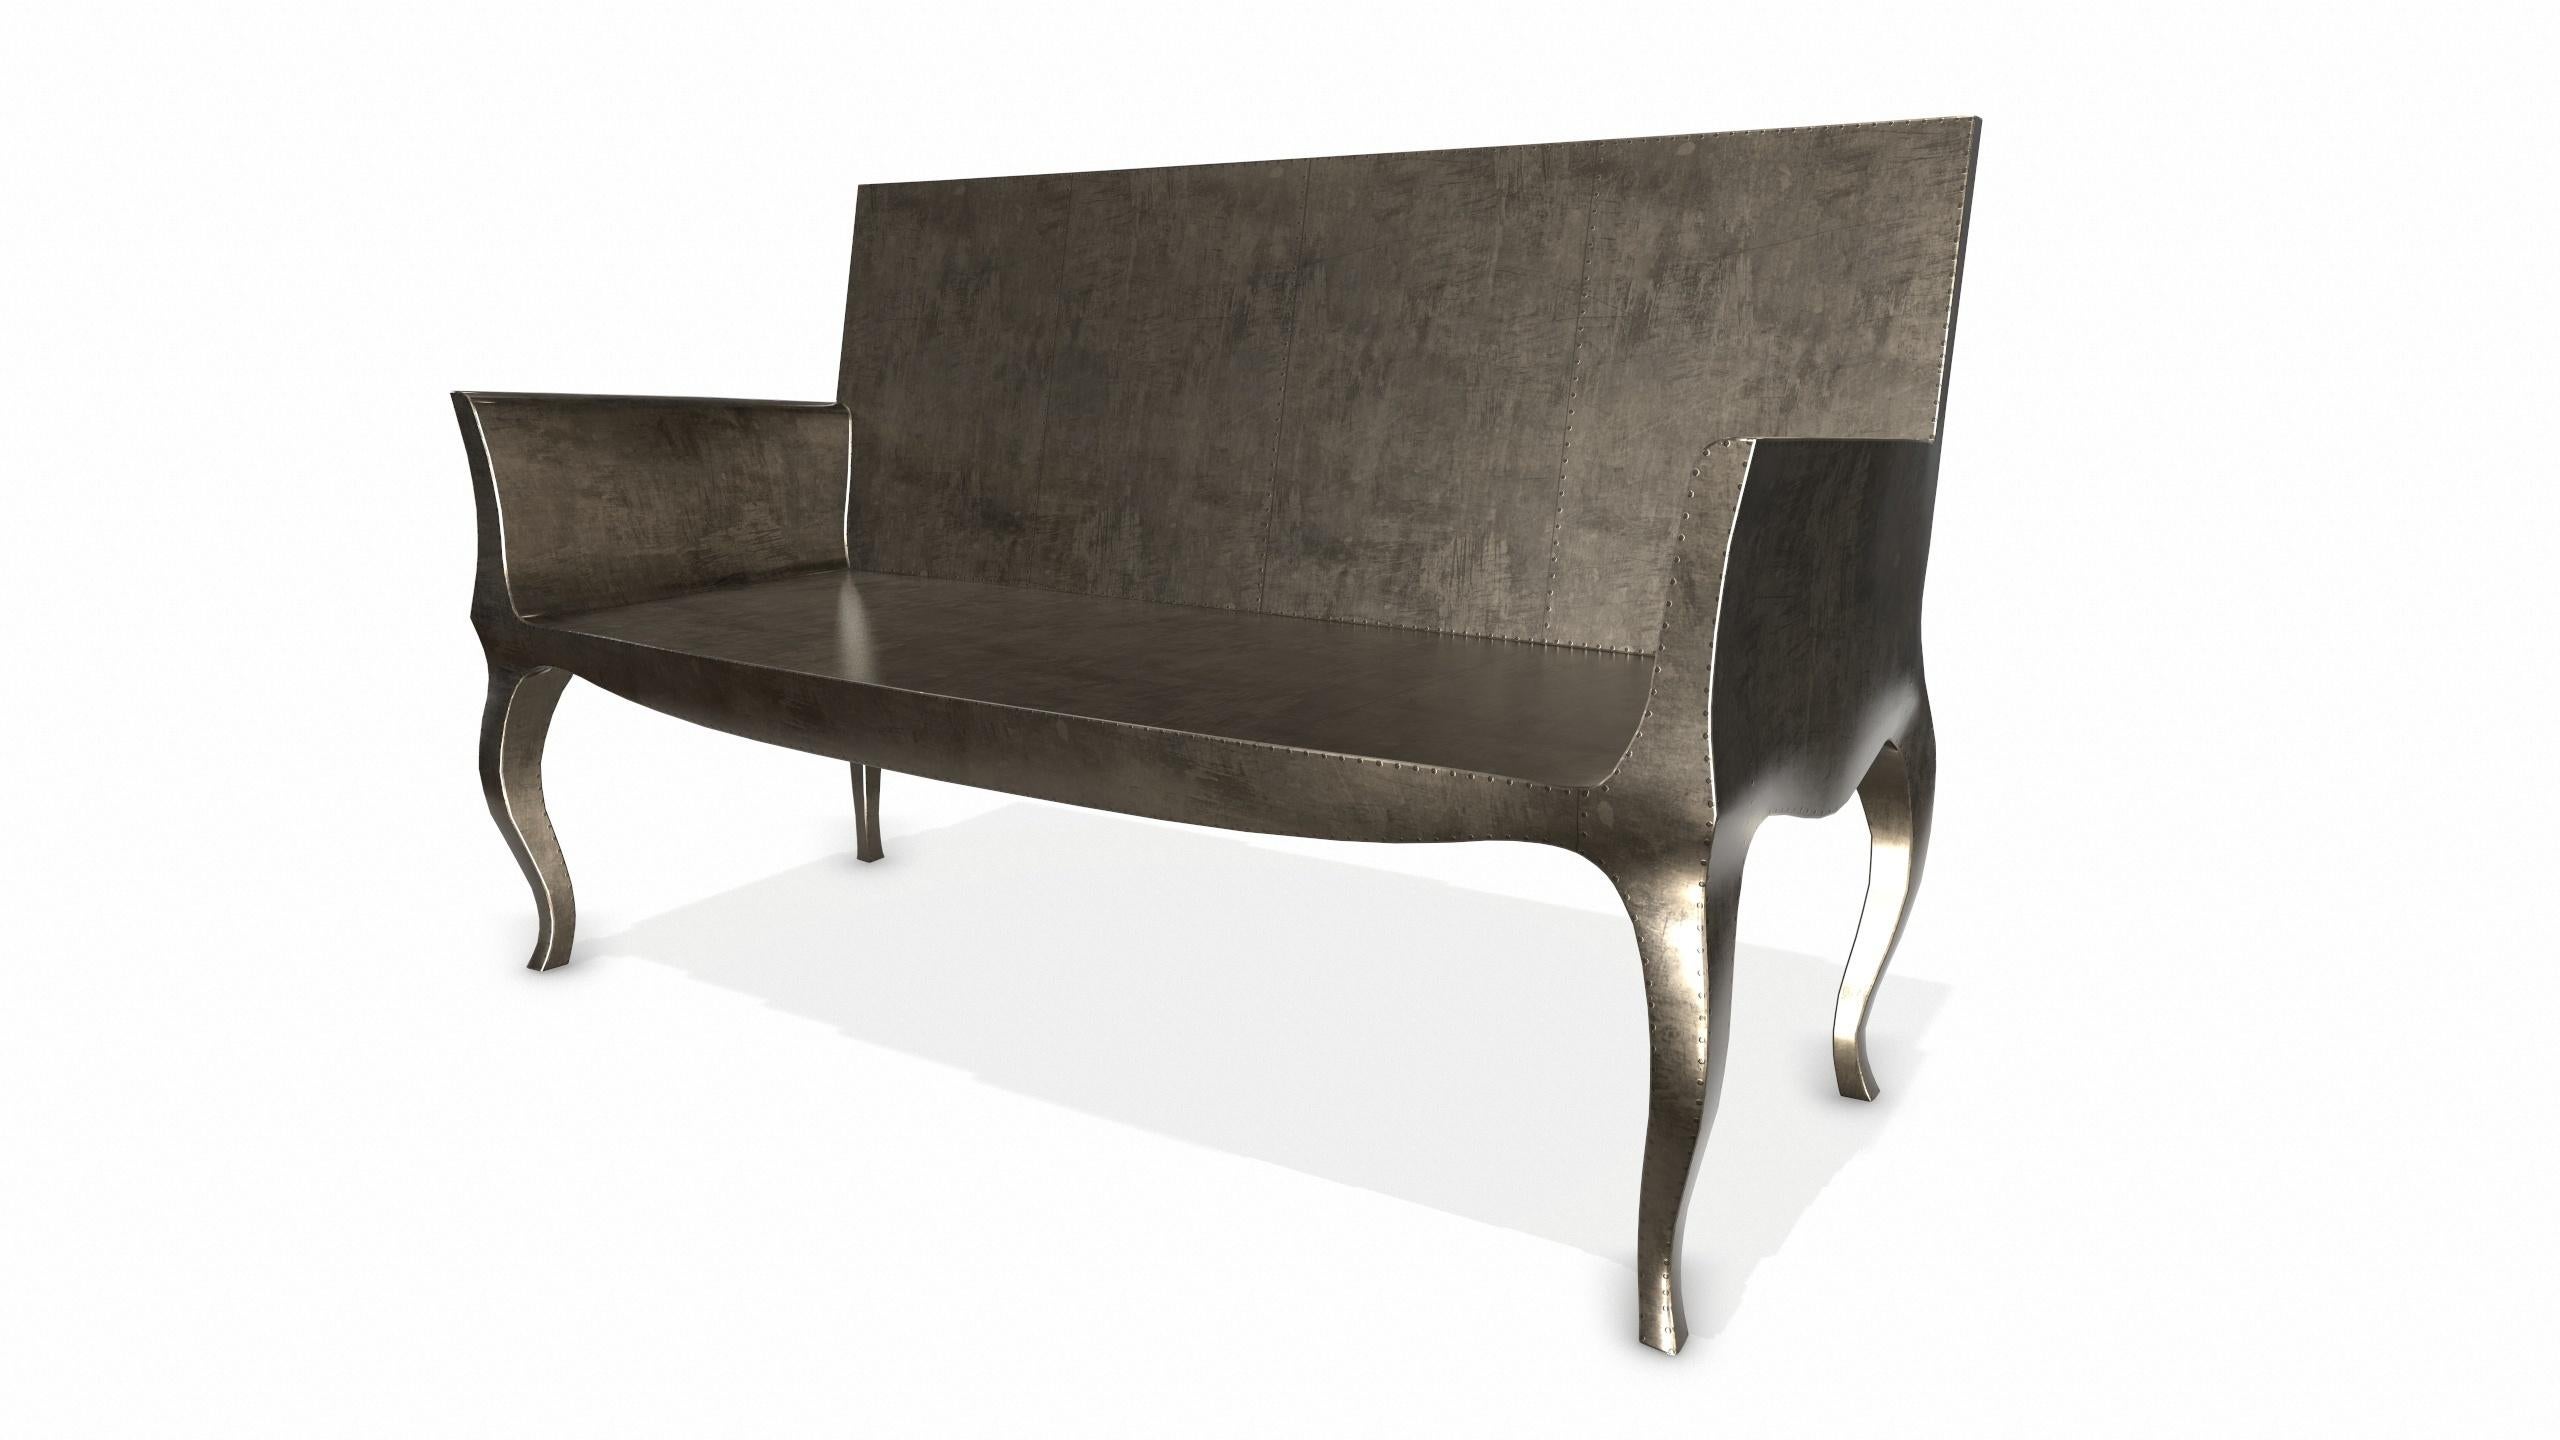 American Louise Settee Art Deco Lounge Chairs in Smooth Antique Bronze by Paul Mathieu For Sale